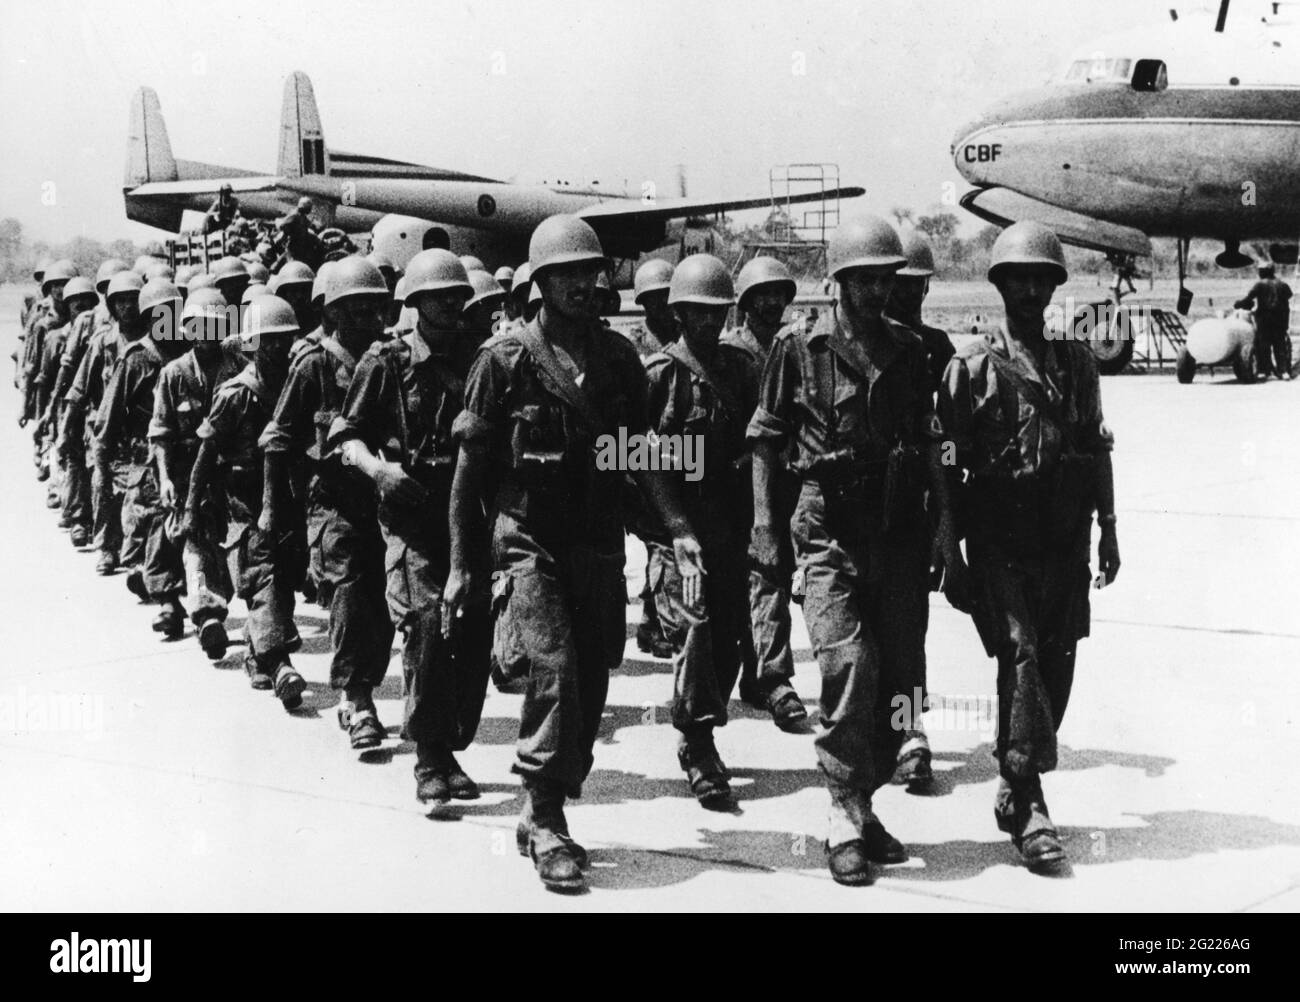 politics, United Nations (UN), peacekeeping forces, assignment in the Congo 1960 - 1964, ADDITIONAL-RIGHTS-CLEARANCE-INFO-NOT-AVAILABLE Stock Photo